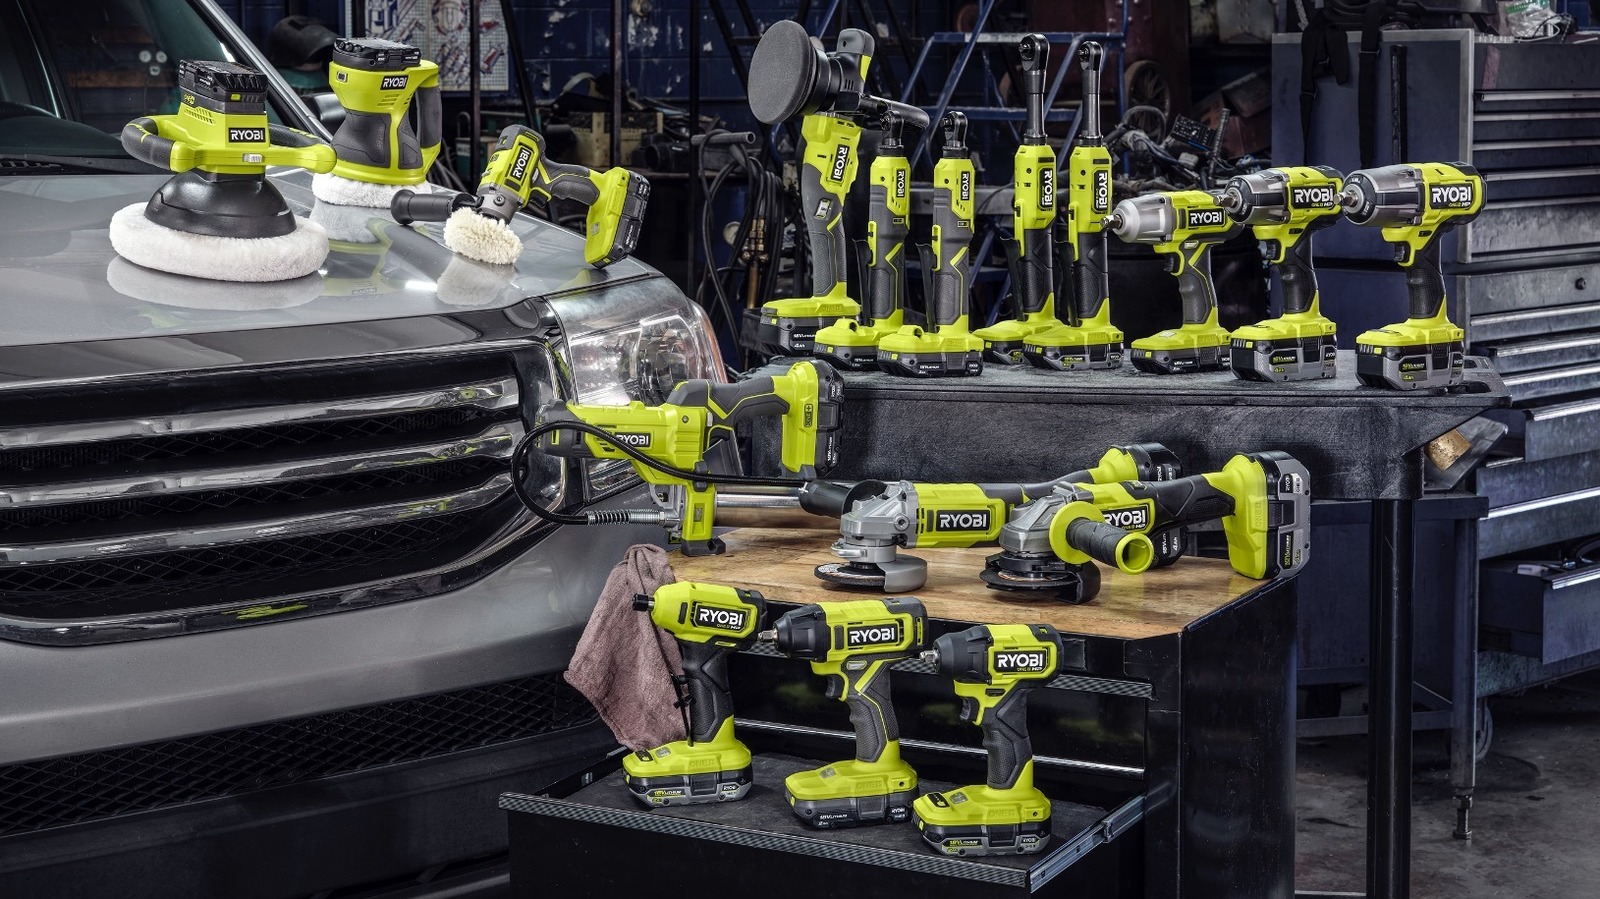 10 Ryobi Tools That Will Come In Handy For Your Next Restomod Project